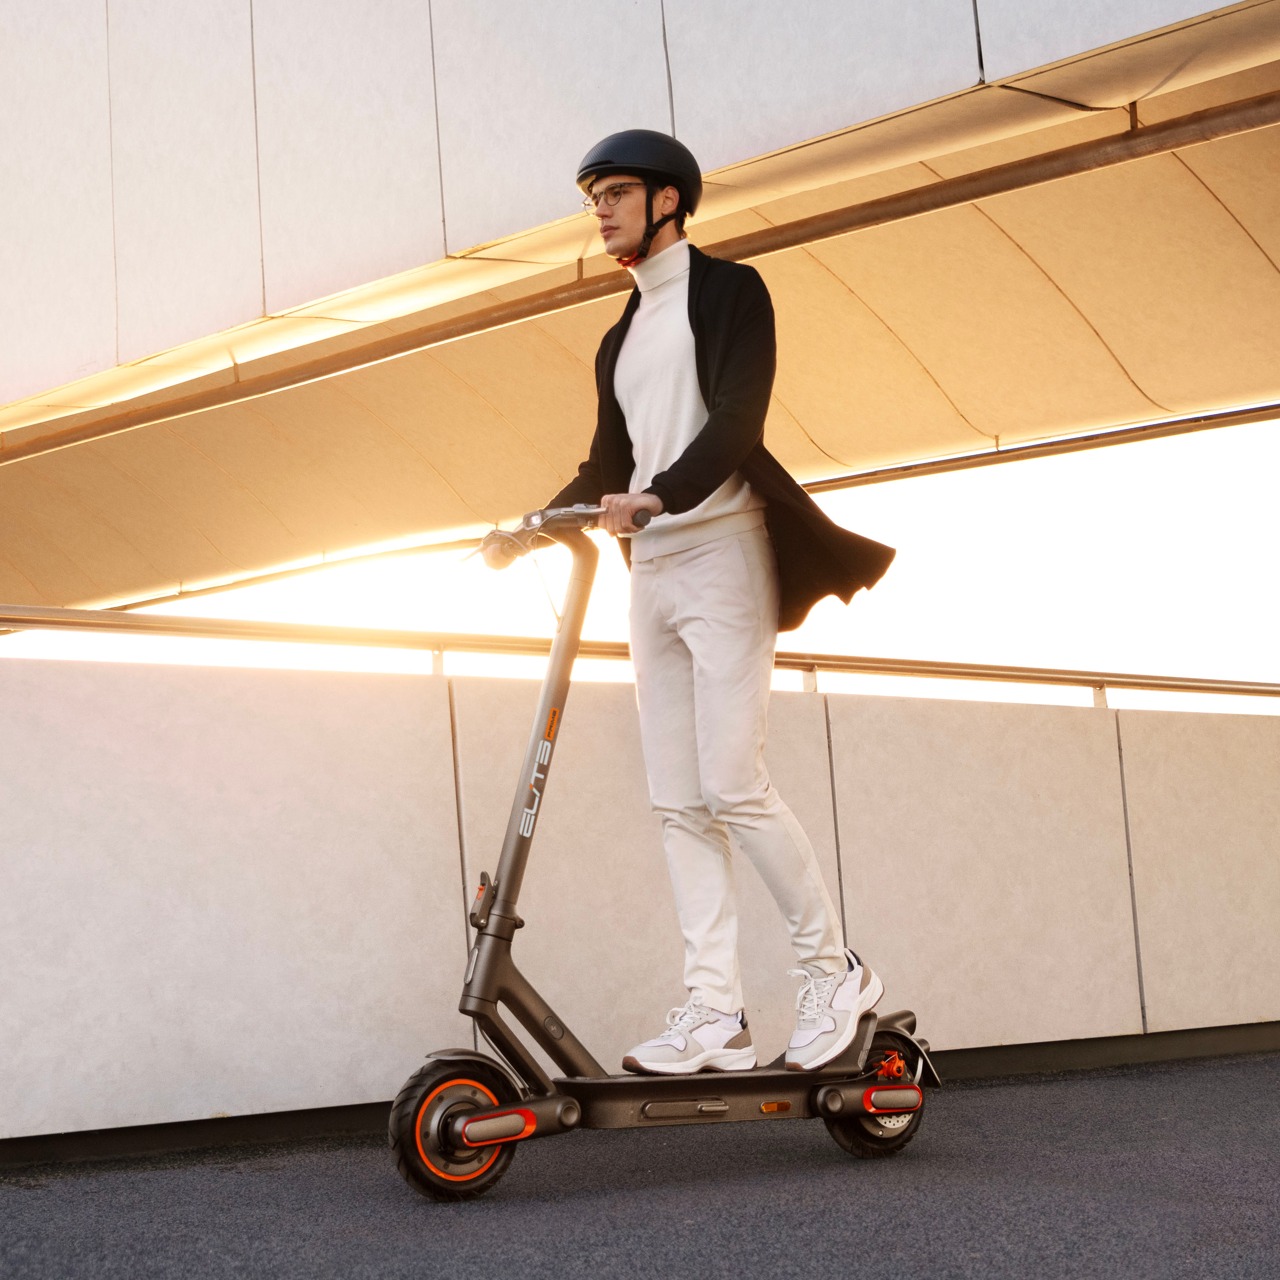 https://www.yankodesign.com/images/design_news/2023/04/this-foldable-e-scooter-comes-with-a-max-range-of-37-miles-making-it-perfect-for-urban-commutes/this_foldable_e-scooter_is_perfect_for_urban_commutes_11.jpg